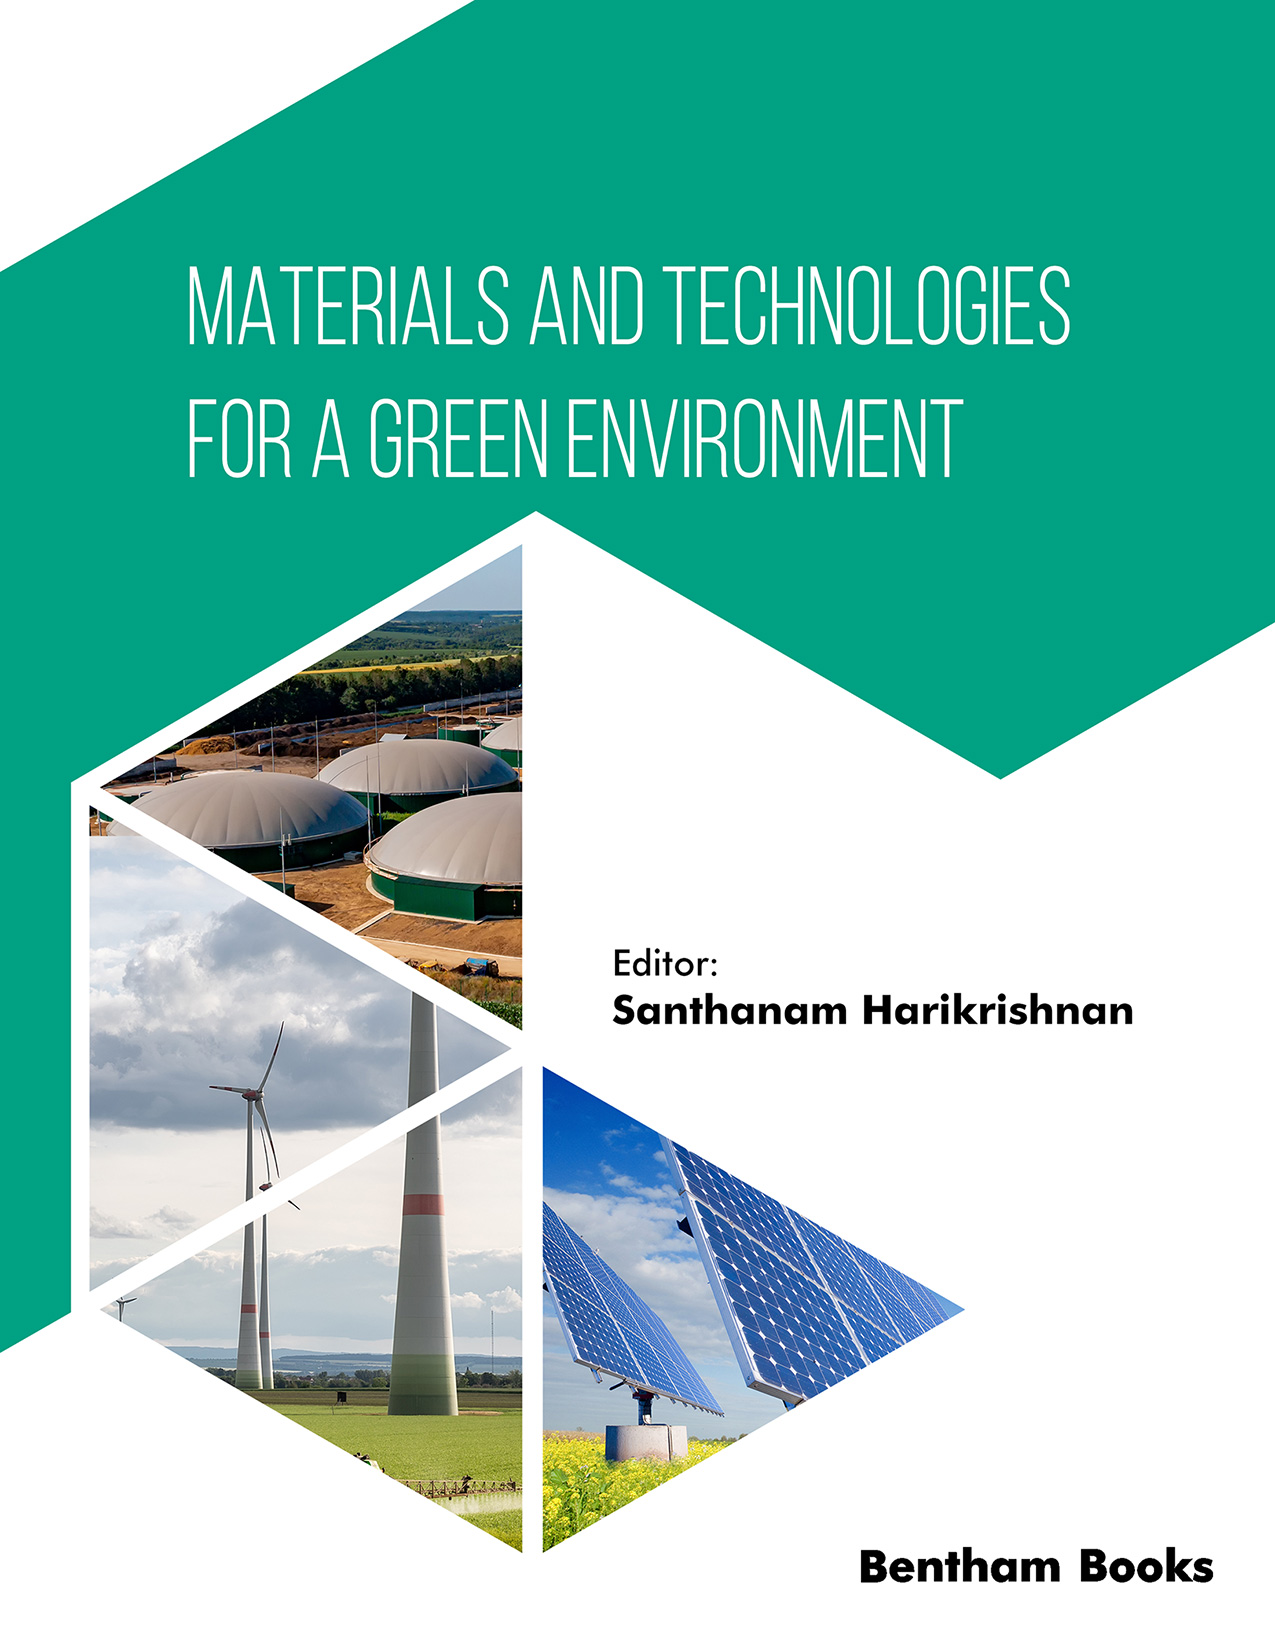 Materials and Technologies for a Green Environment